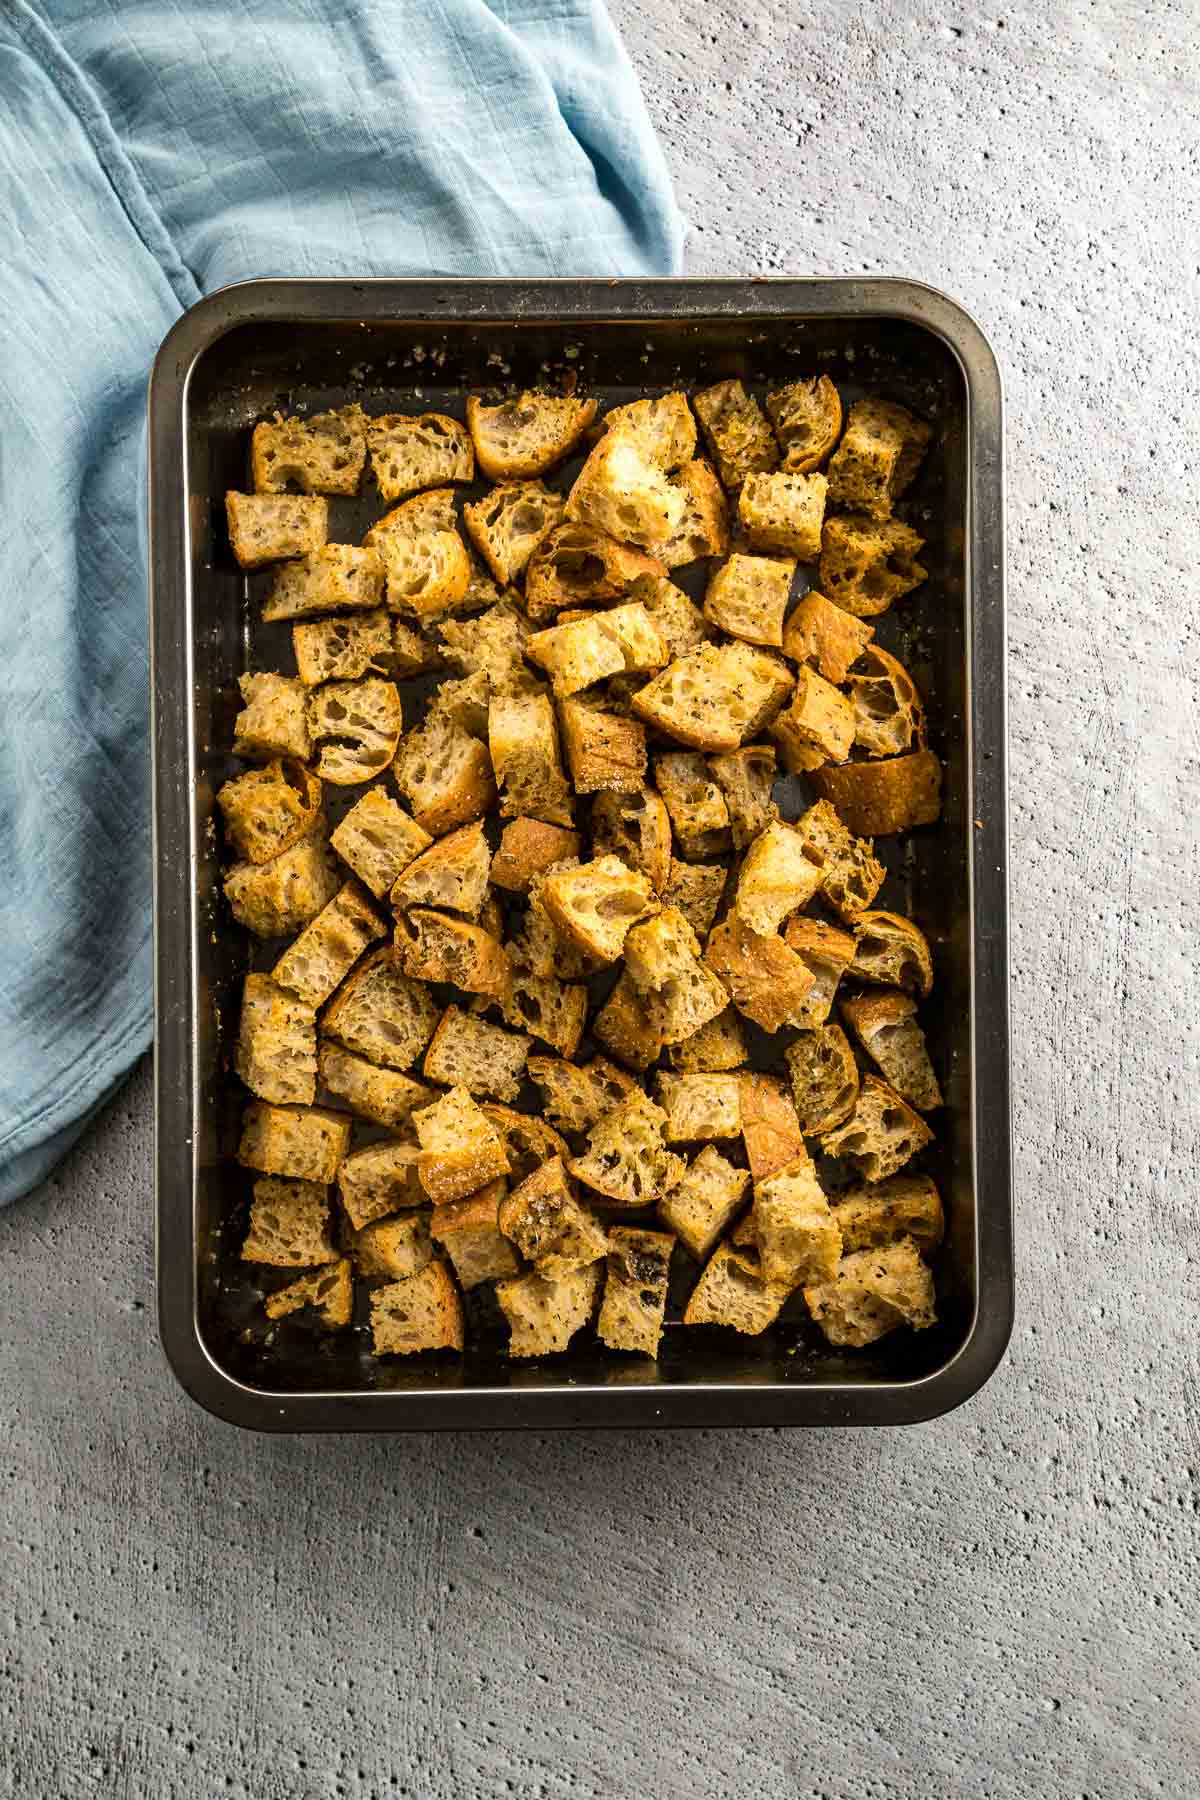 Step 5 - Crispy golden baked croutons in a baking dish.